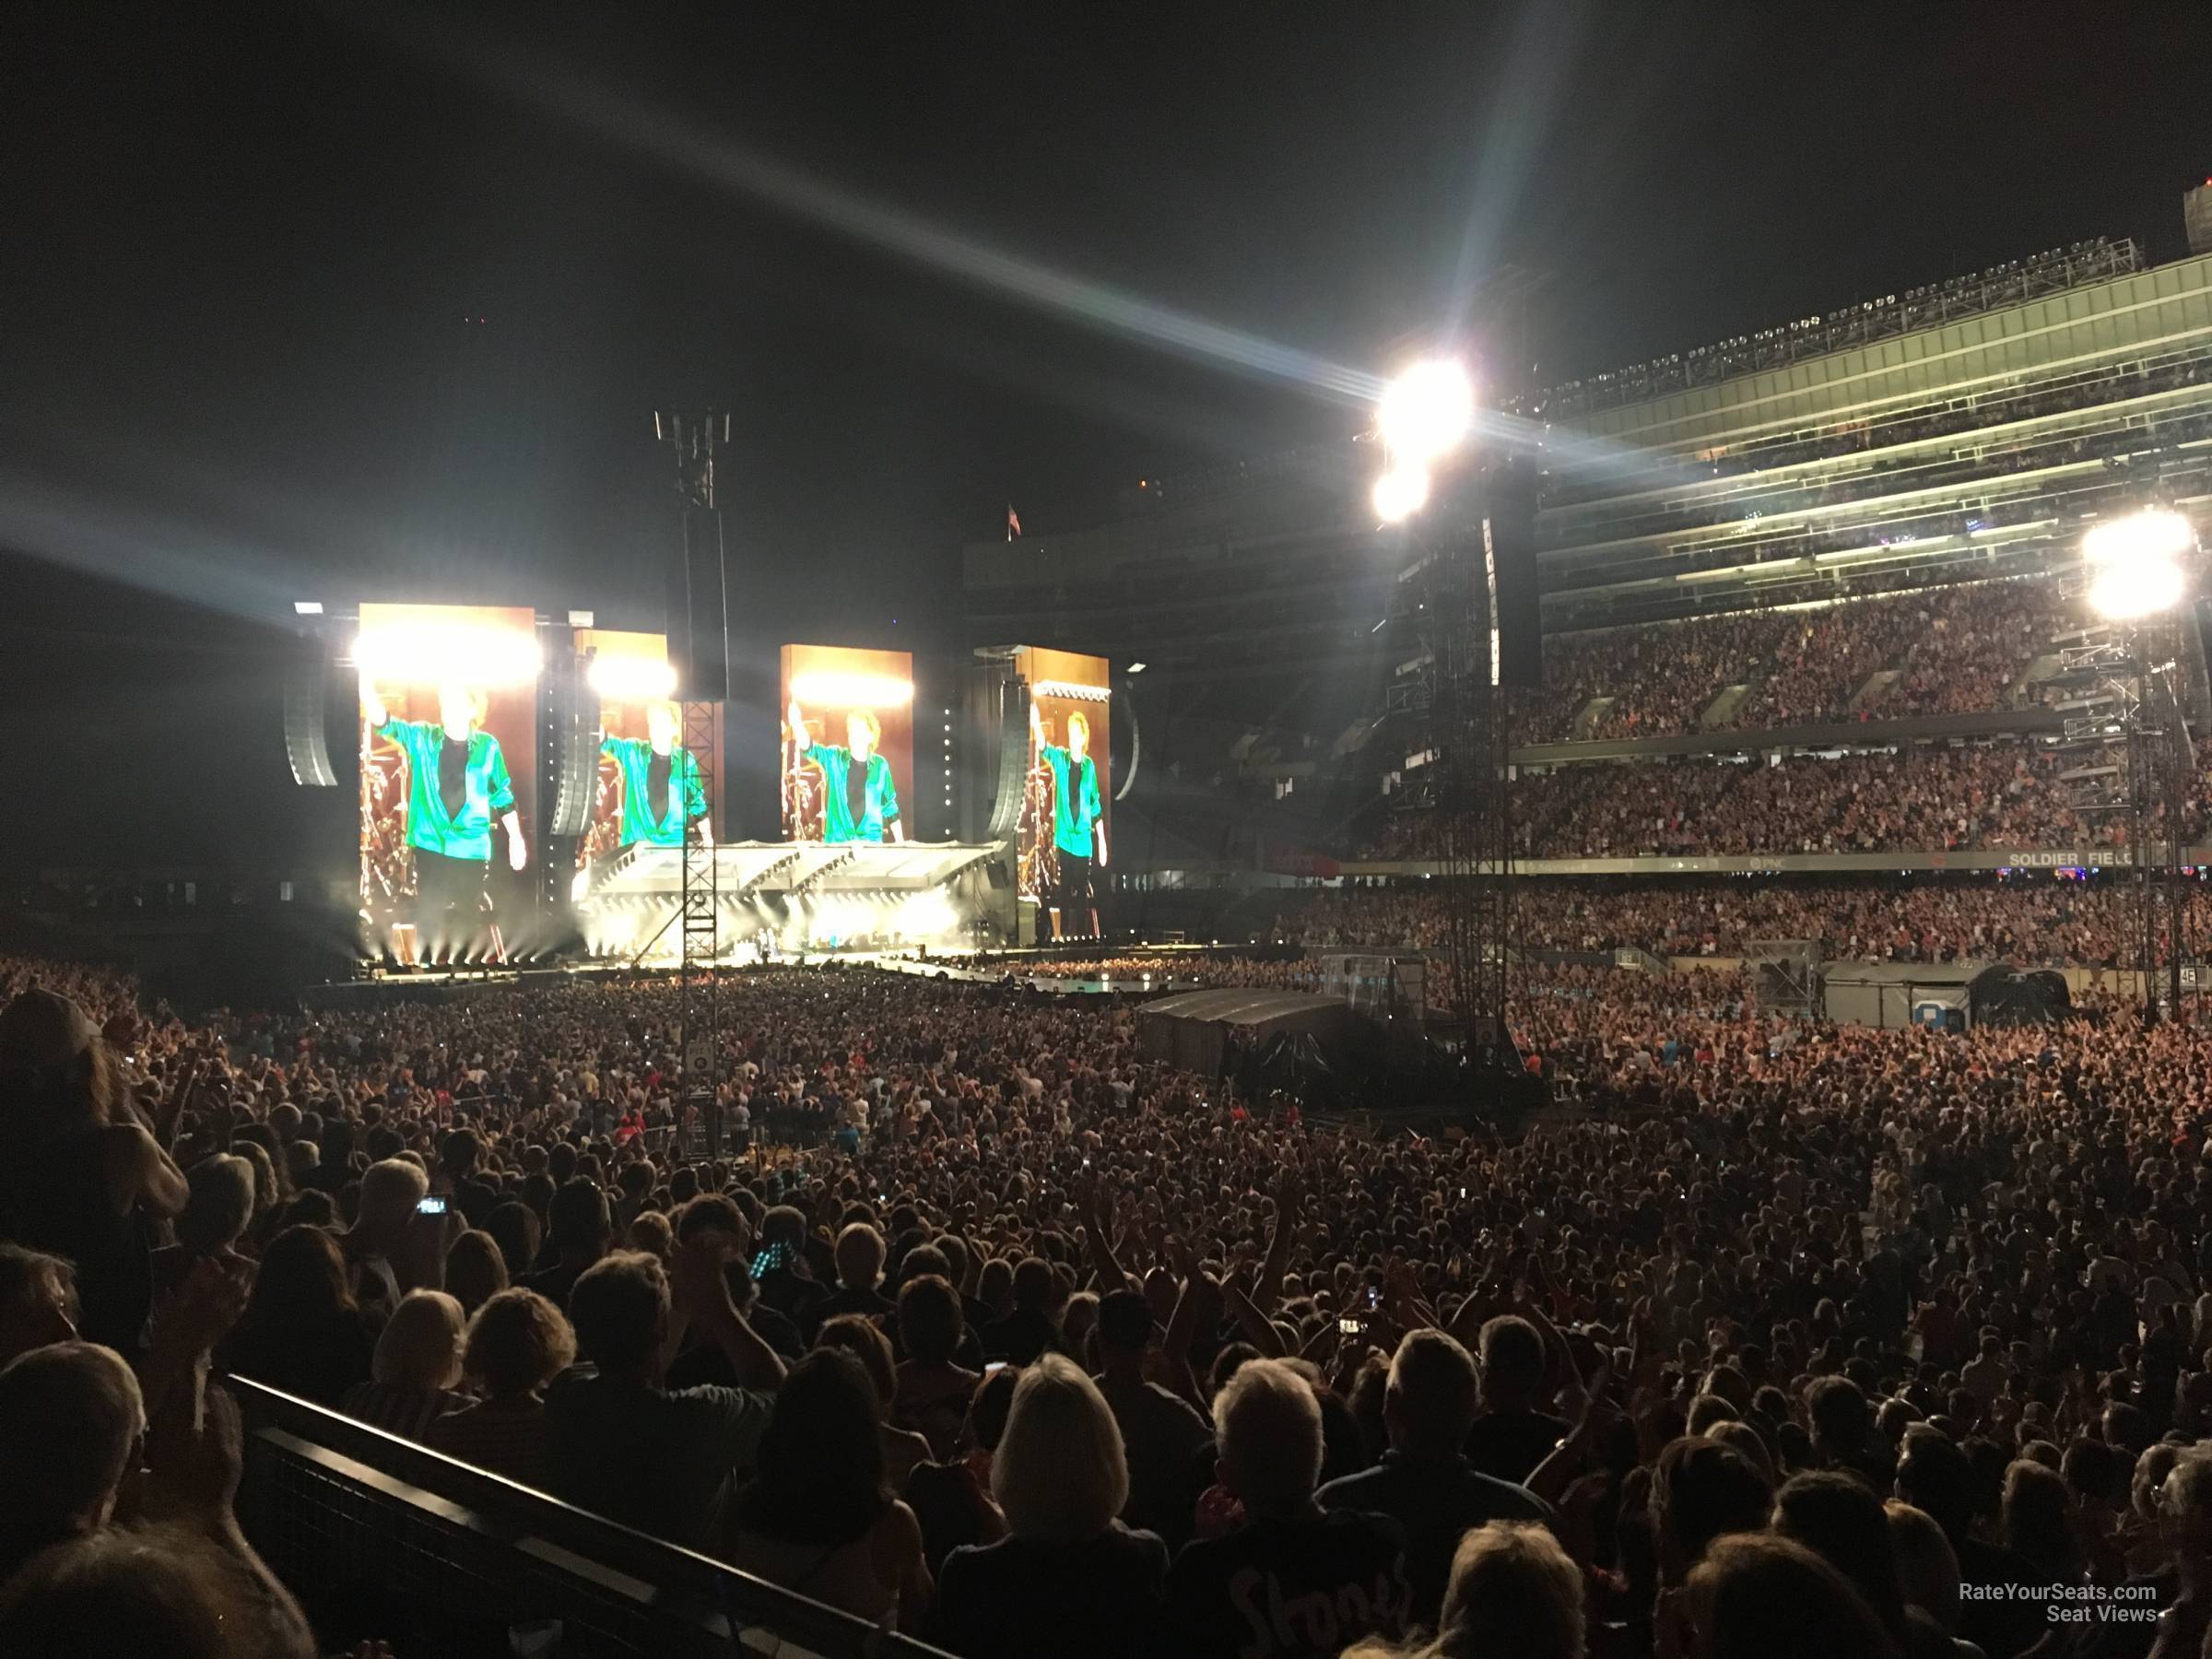 section 130, row 19 seat view  for concert - soldier field